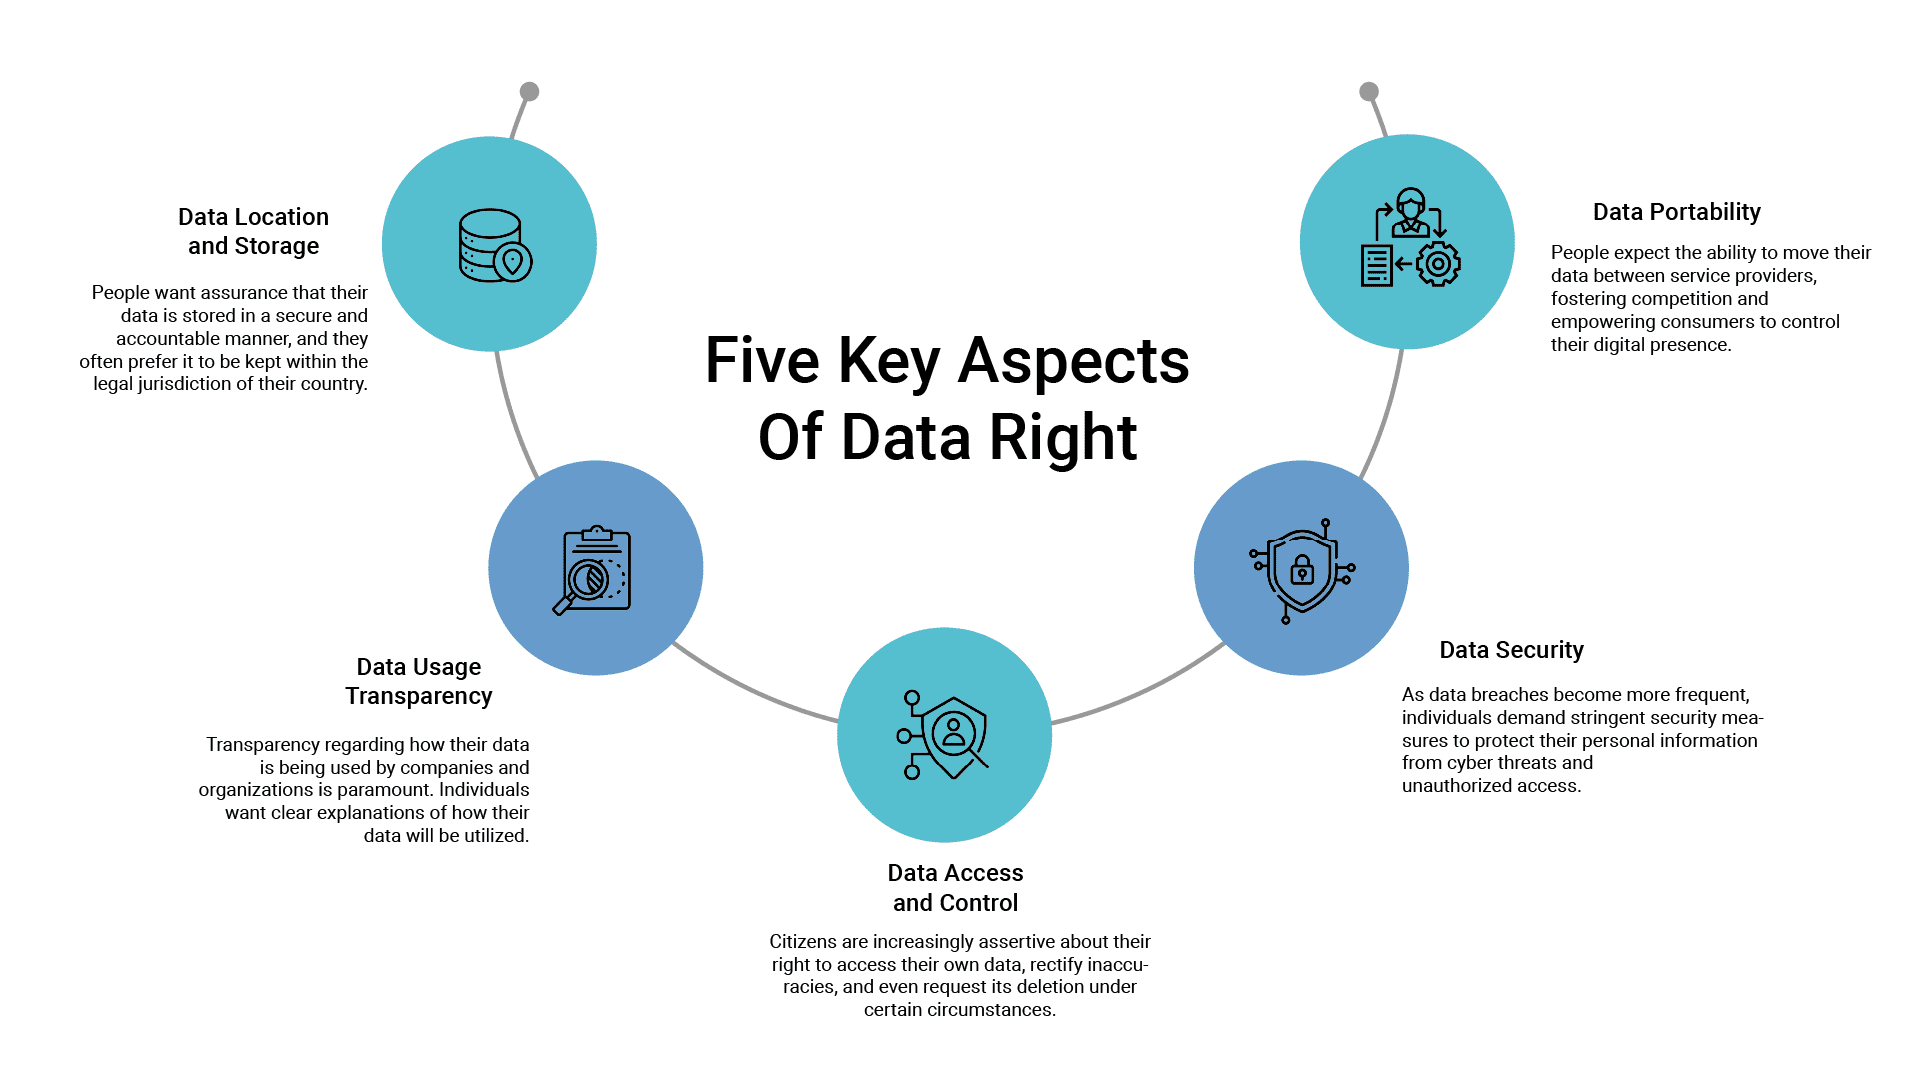 Five Key Aspects of Data Right